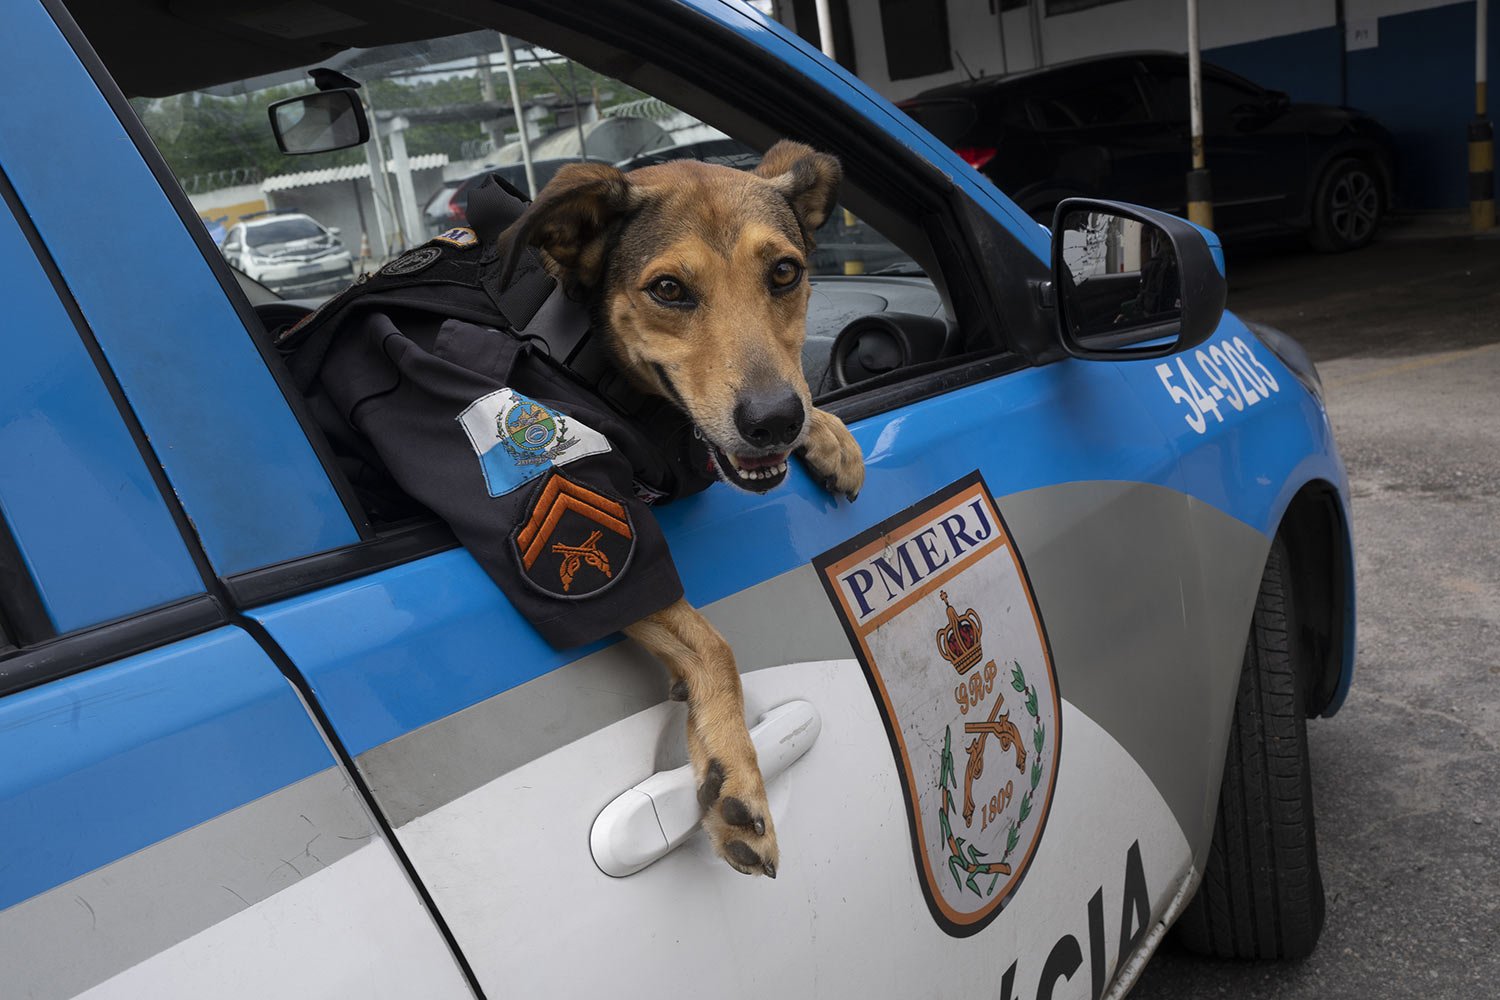  Police dog  "Corporal Oliveira", wears a police uniform as looks out from a patrol car at the 17 Military Police Battalion's station in Rio de Janeiro, Brazil, April 7, 2022. The dog, which is used for social campaigns by the police like flu vaccina